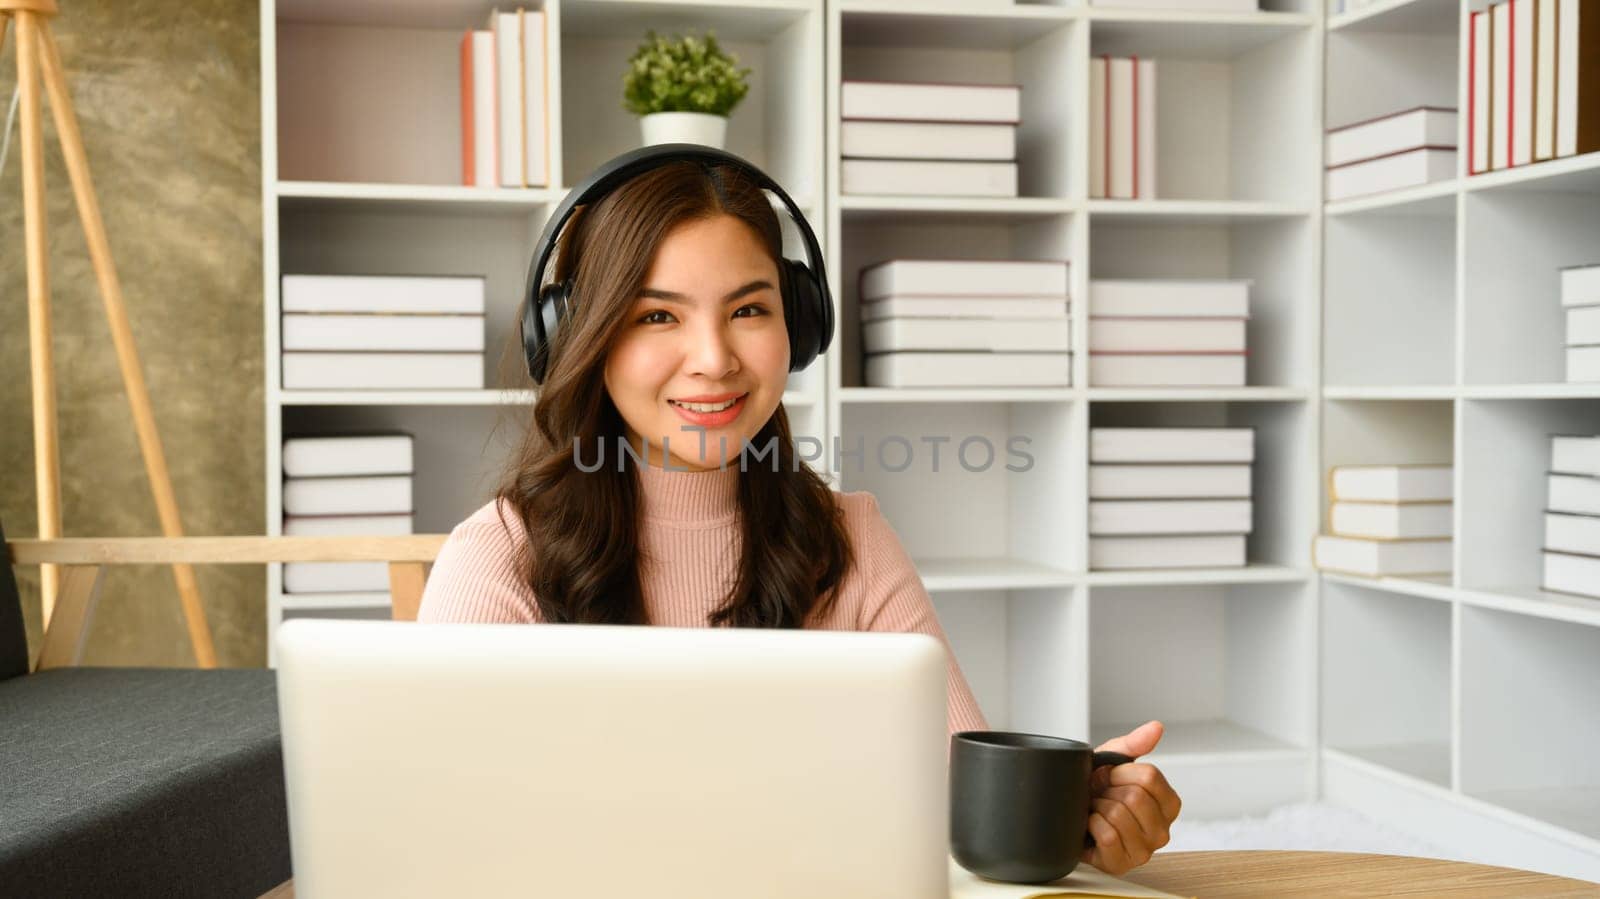 Attractive millennial woman in headphone communicating online or distantly working on laptop at home.